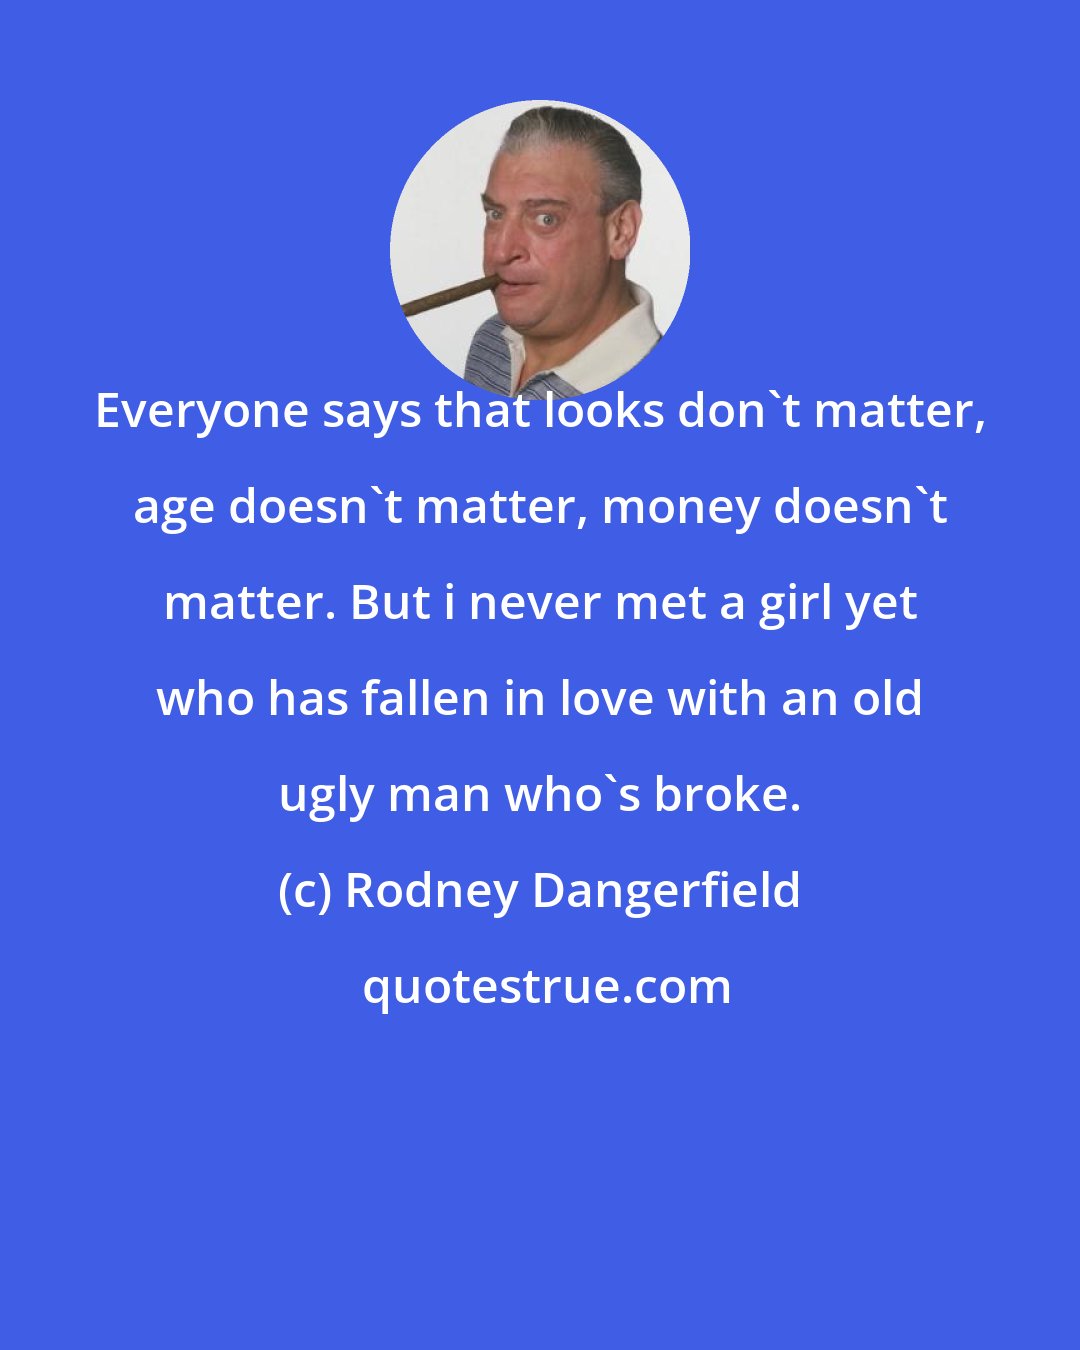 Rodney Dangerfield: Everyone says that looks don't matter, age doesn't matter, money doesn't matter. But i never met a girl yet who has fallen in love with an old ugly man who's broke.